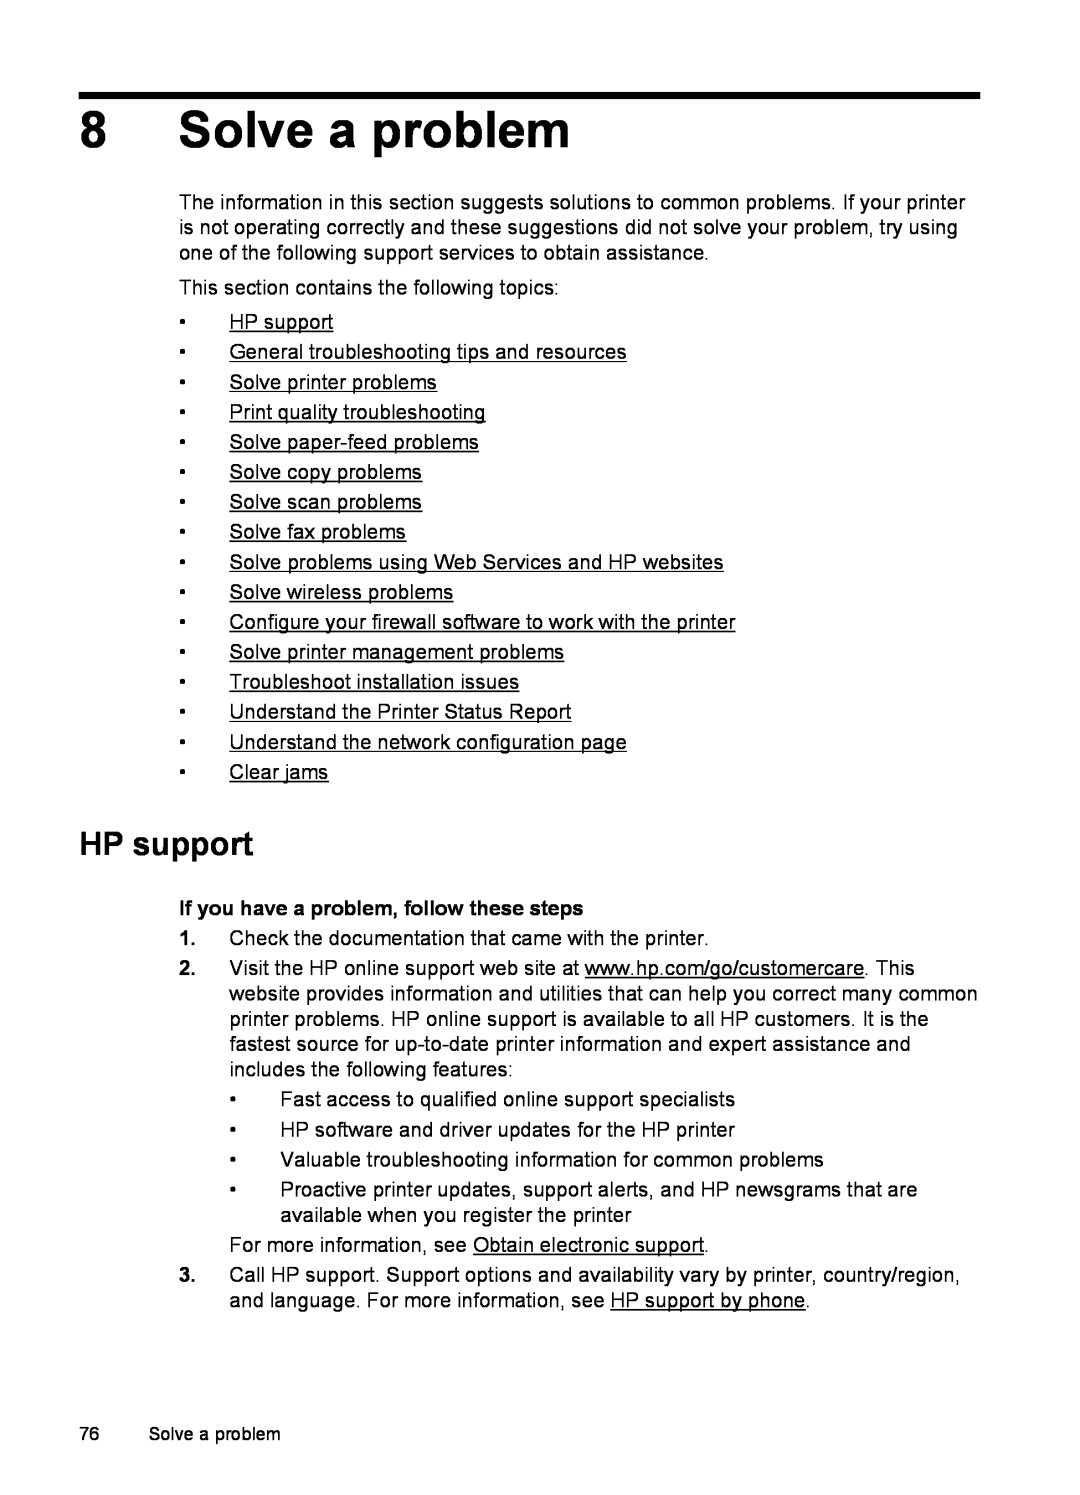 HP 6600 - H7 manual Solve a problem, HP support, If you have a problem, follow these steps 